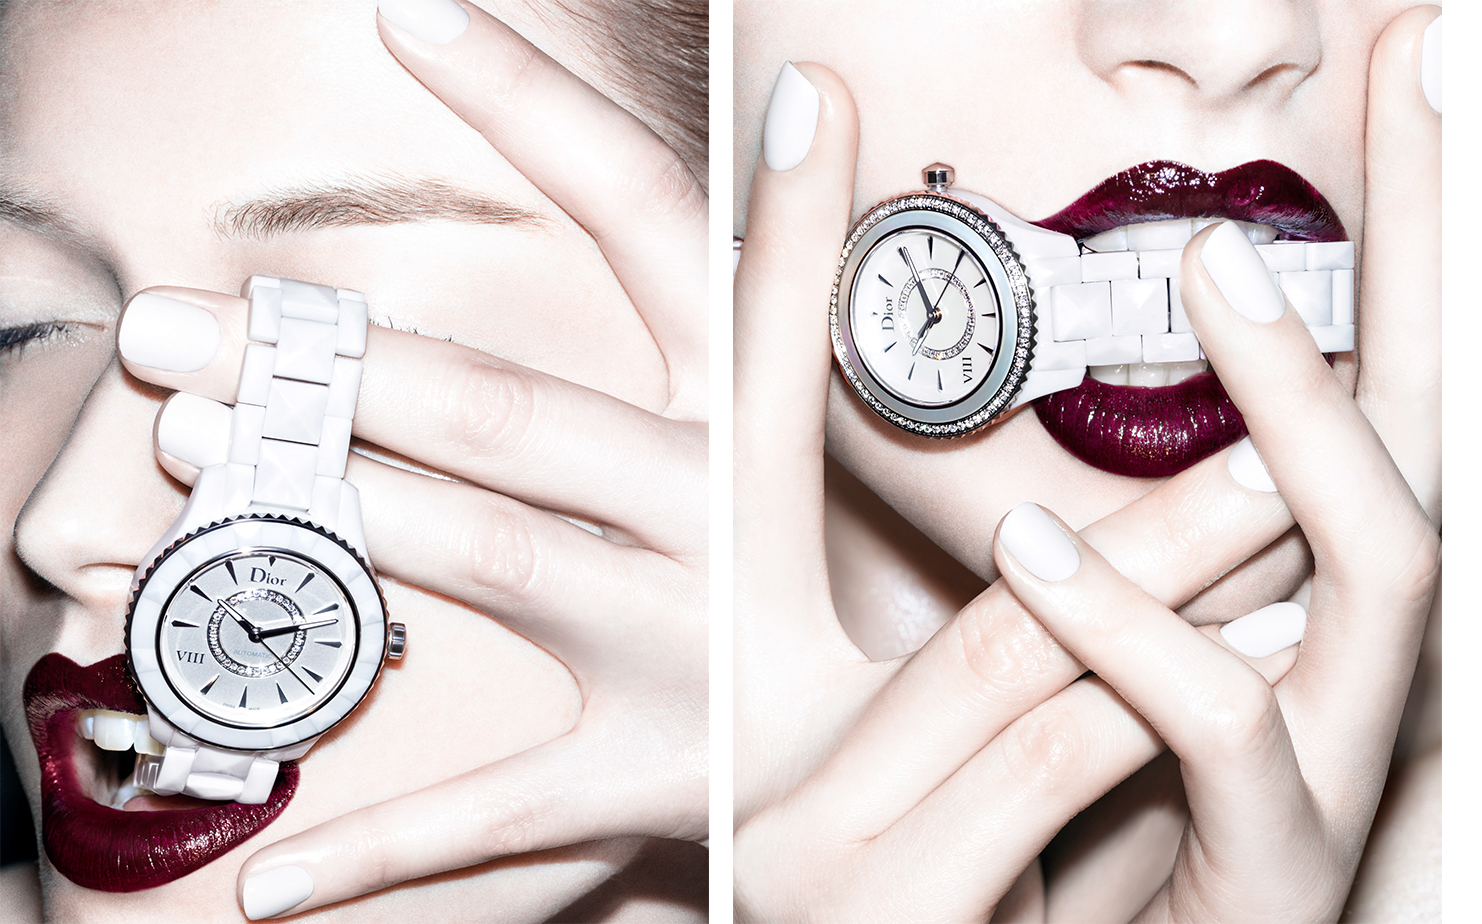   Dior Magazine WATCHES   CREATIVE DIRECTOR Fabien Baron MAKE UP Francelle Daly 